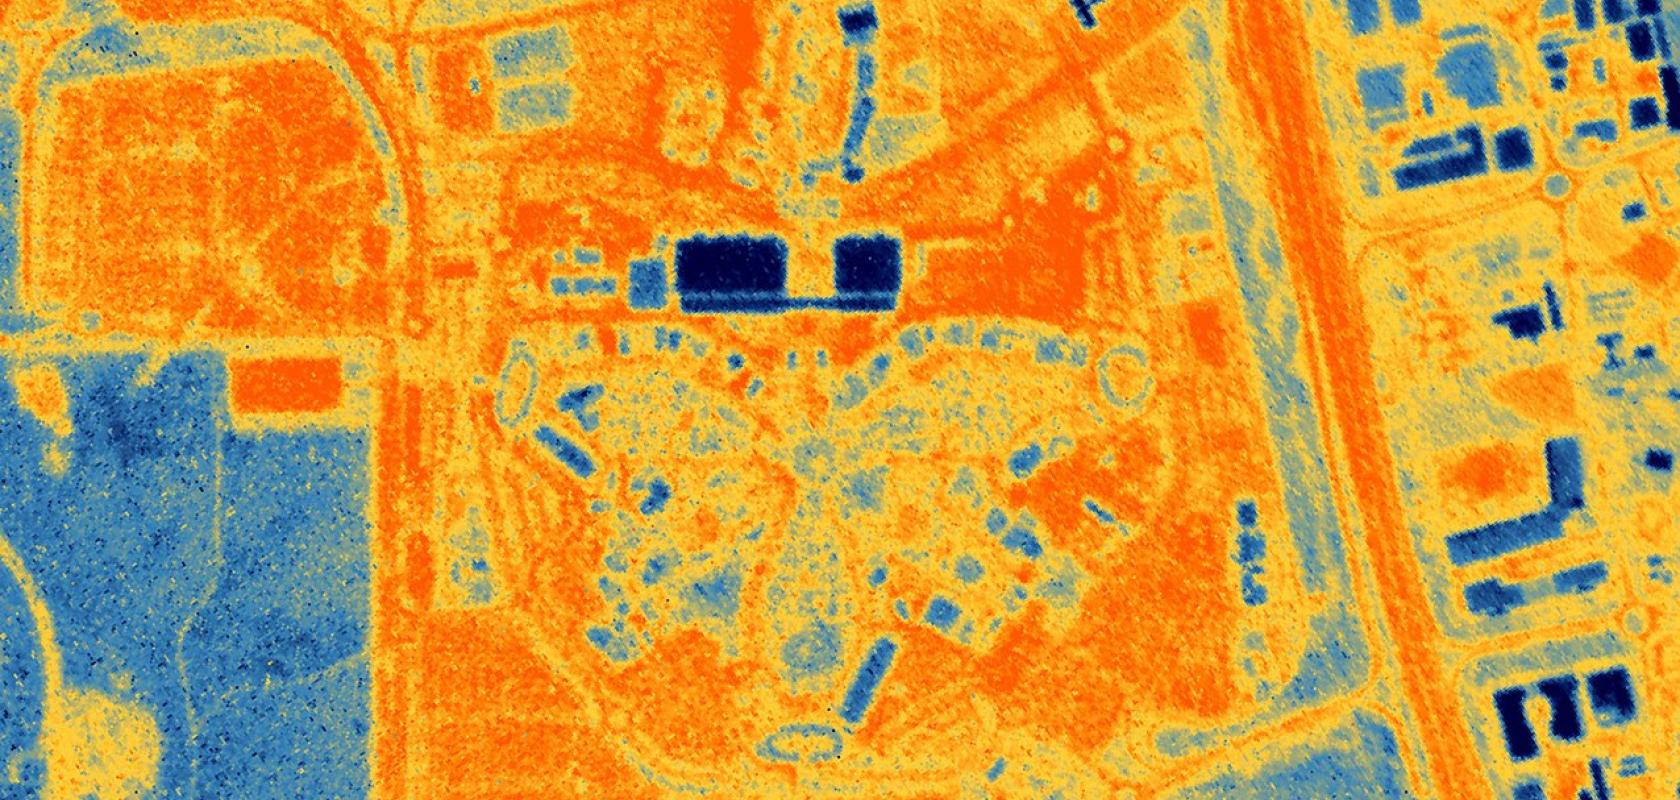 An infrared image from HOTSAT-1 of the COP28 climate conferemce venue